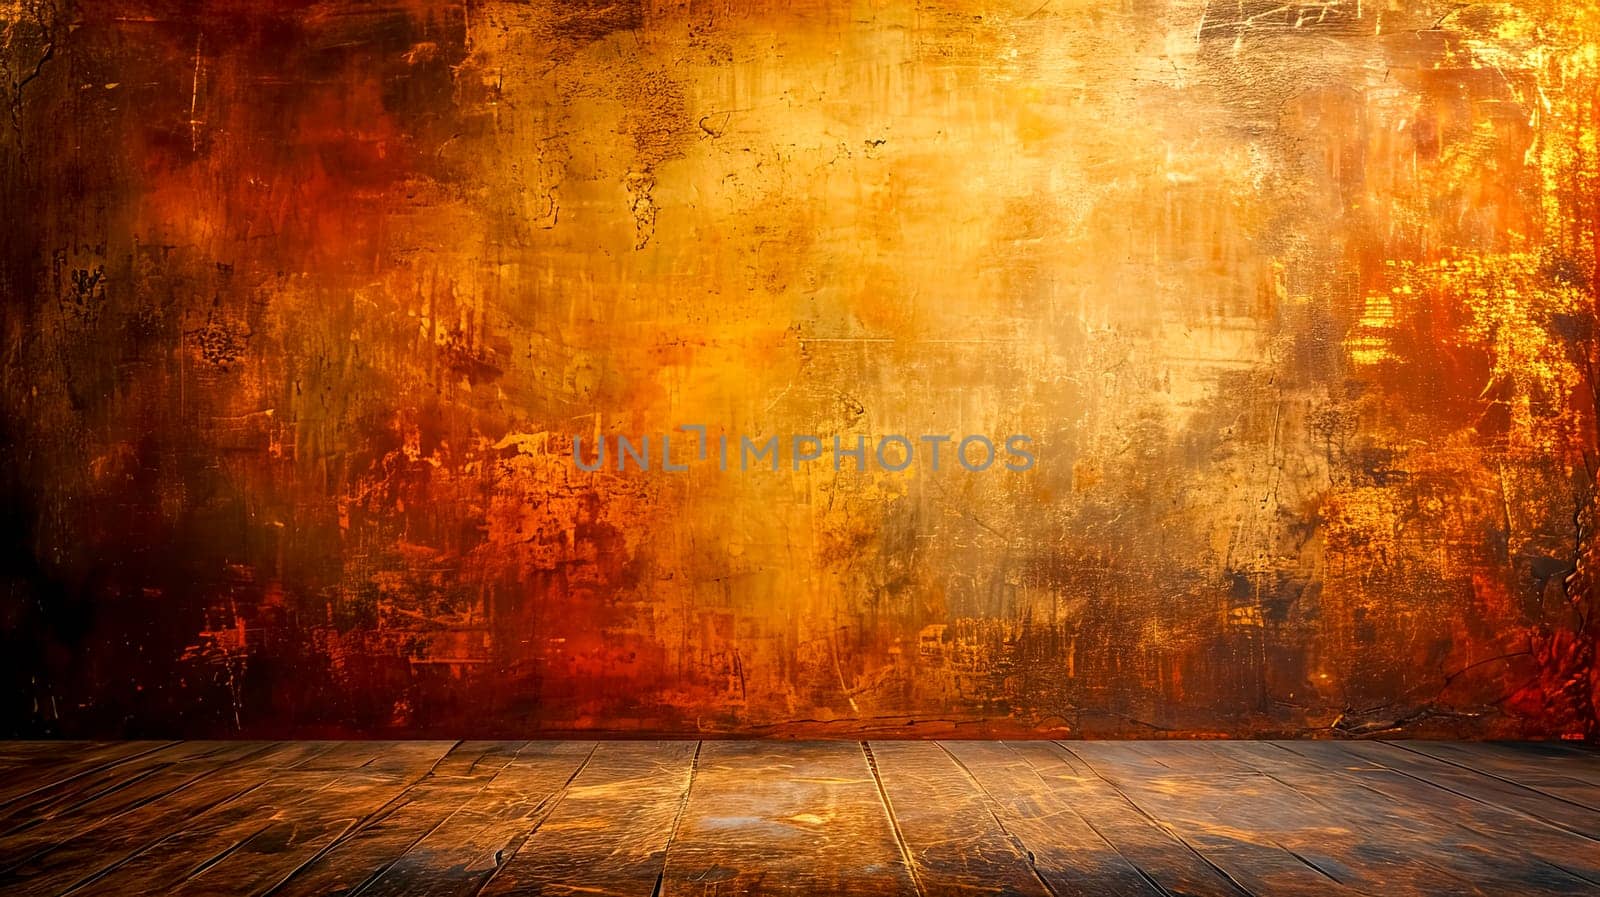 abstract painting in rich gold and burnt orange tones, creating an impression of warmth and depth, against a dark wooden floor, suitable for a sophisticated backdrop or artistic display